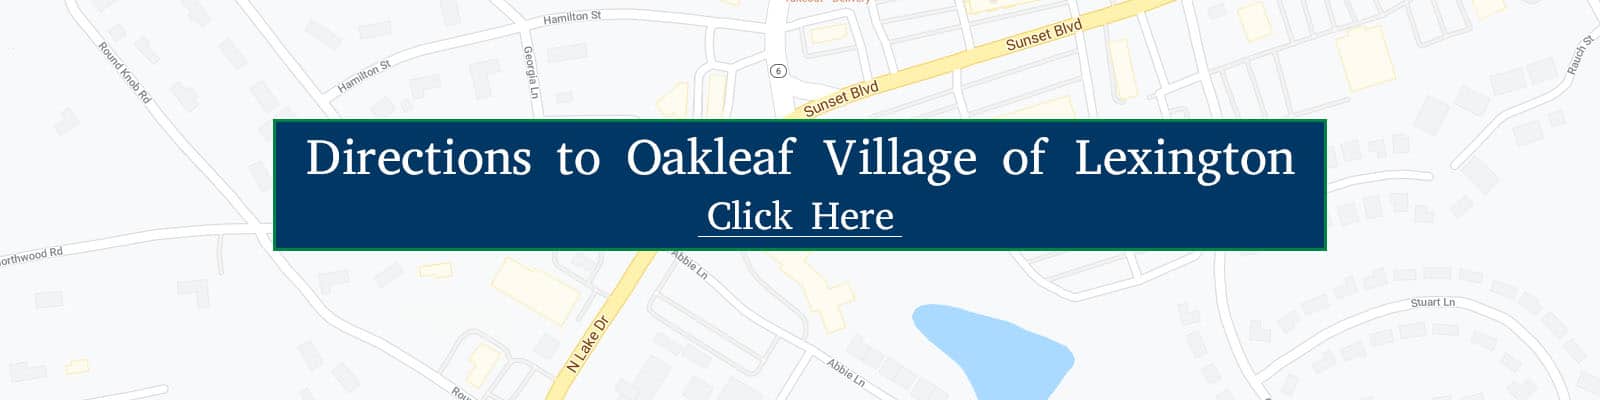 Directions and Map to Oakleaf Village of Lexington